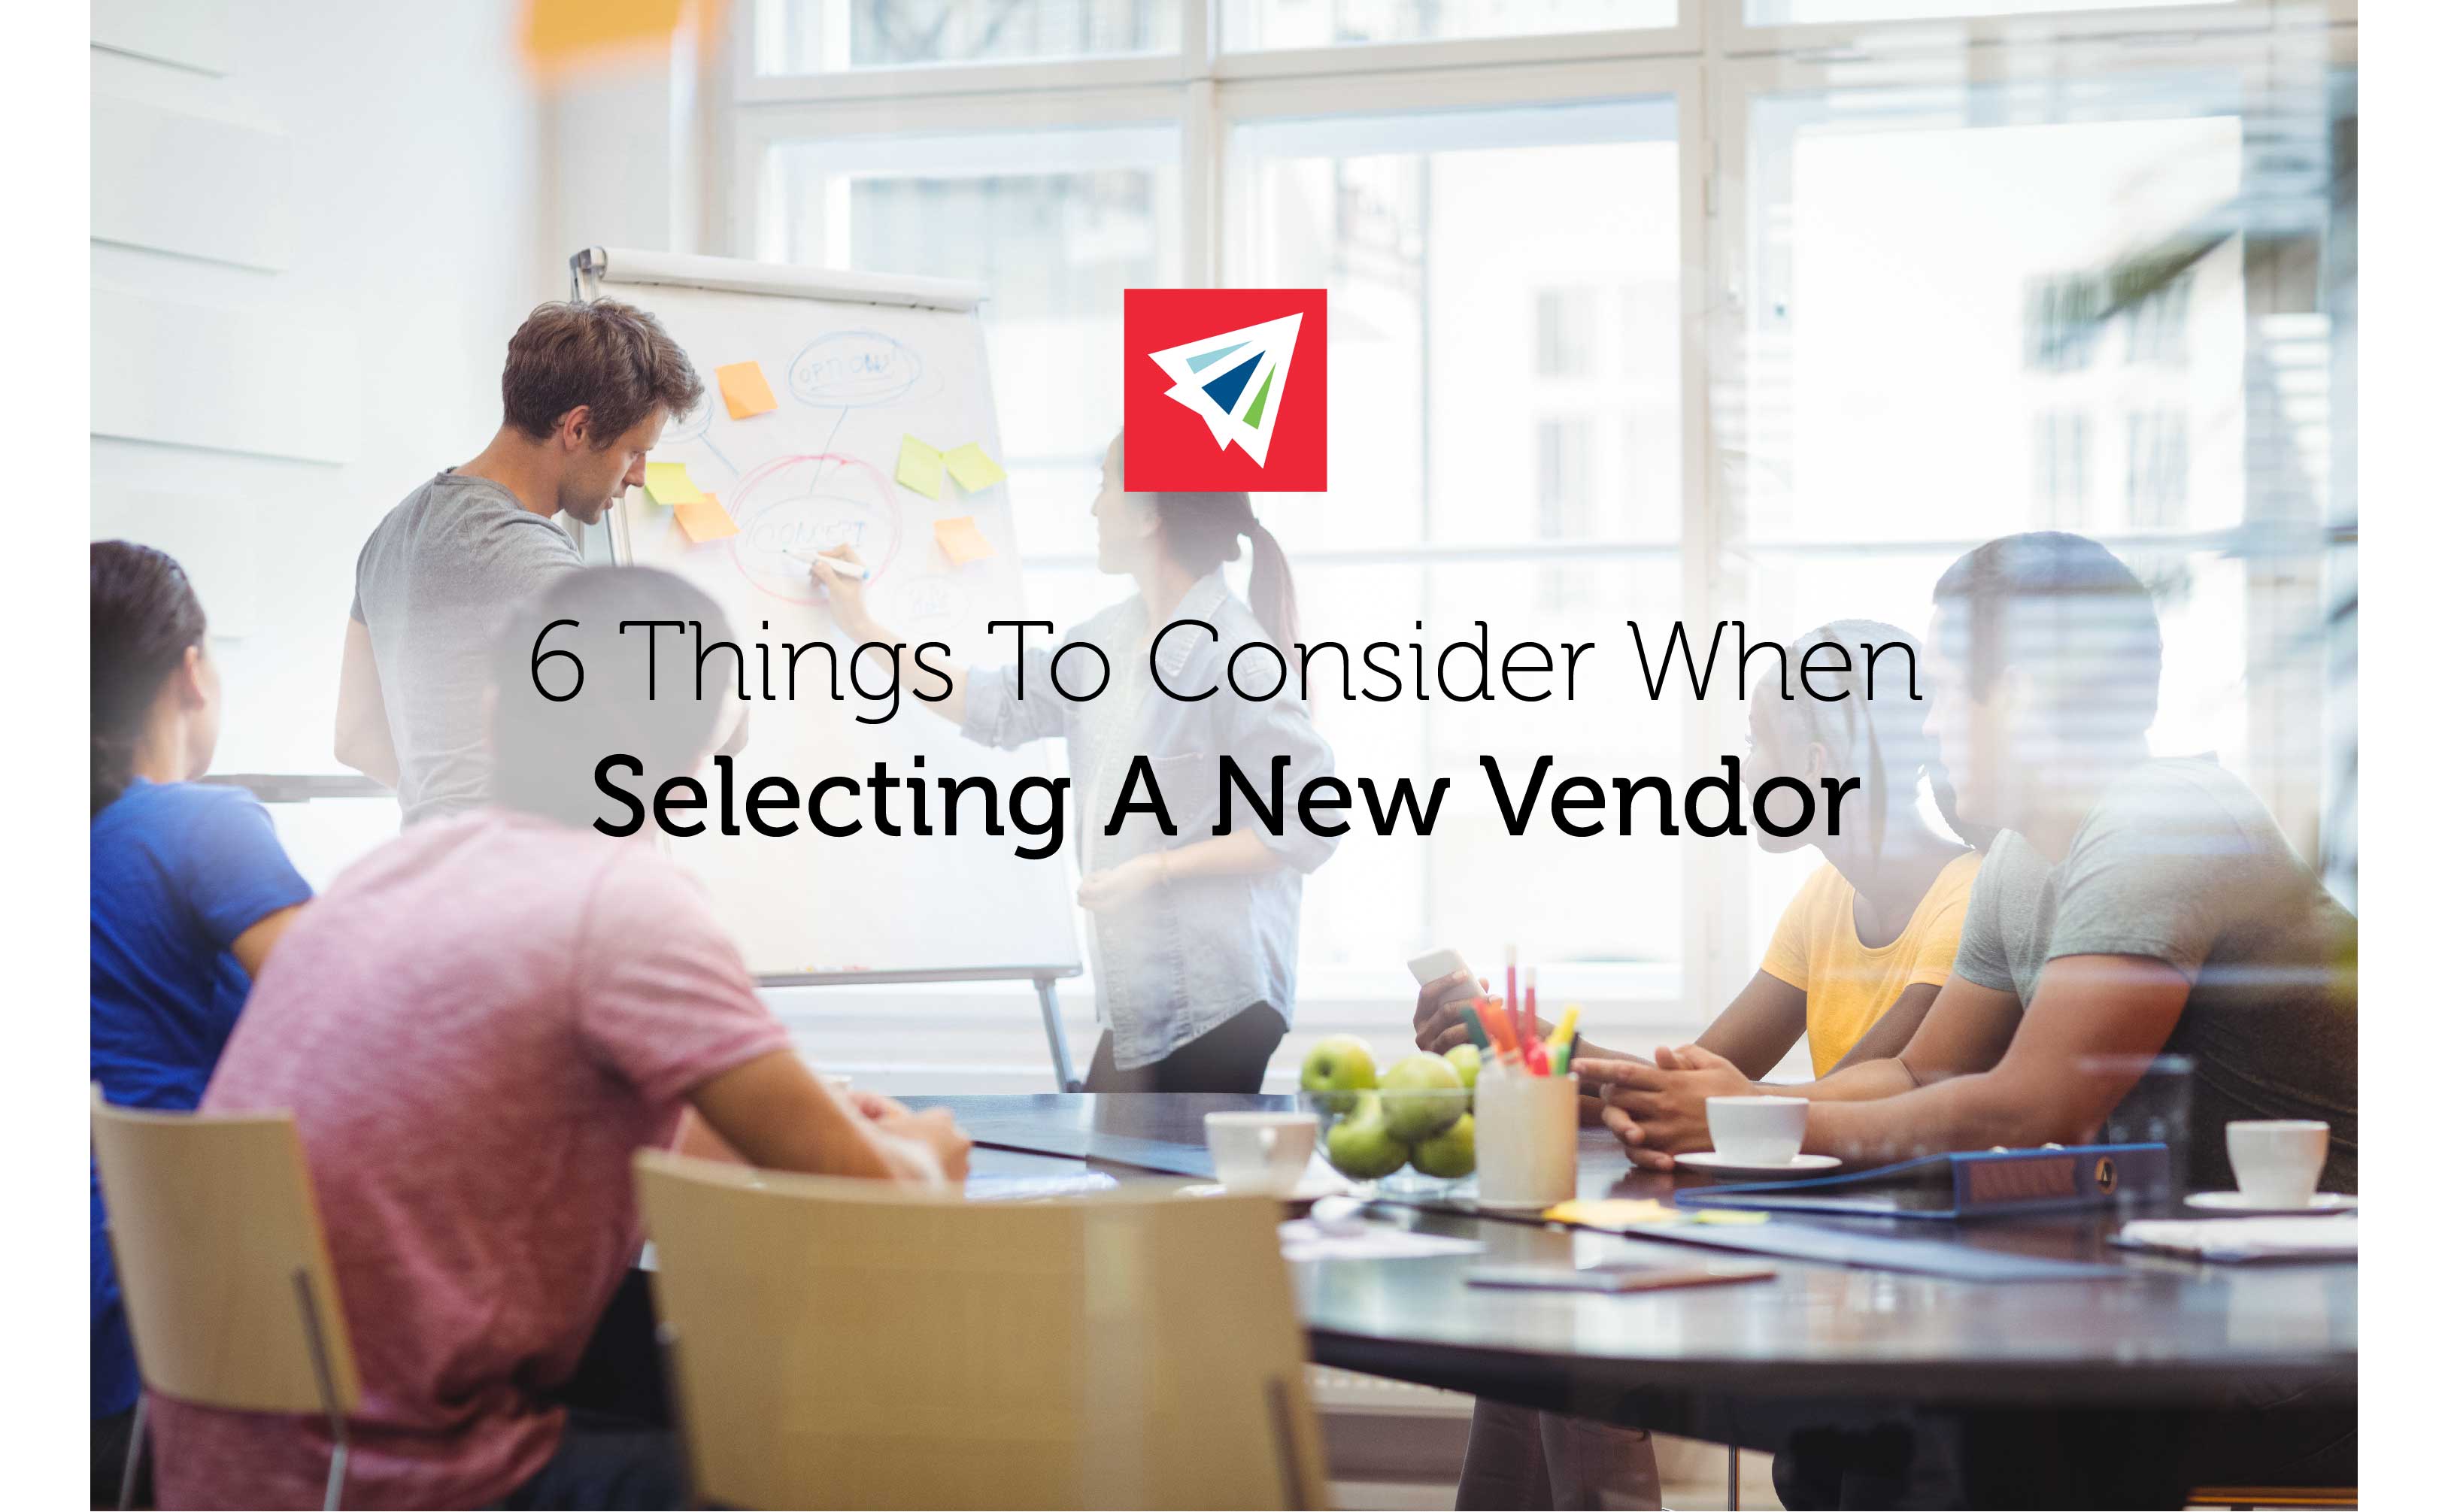 6 Things to Consider When Selecting a New Vendor